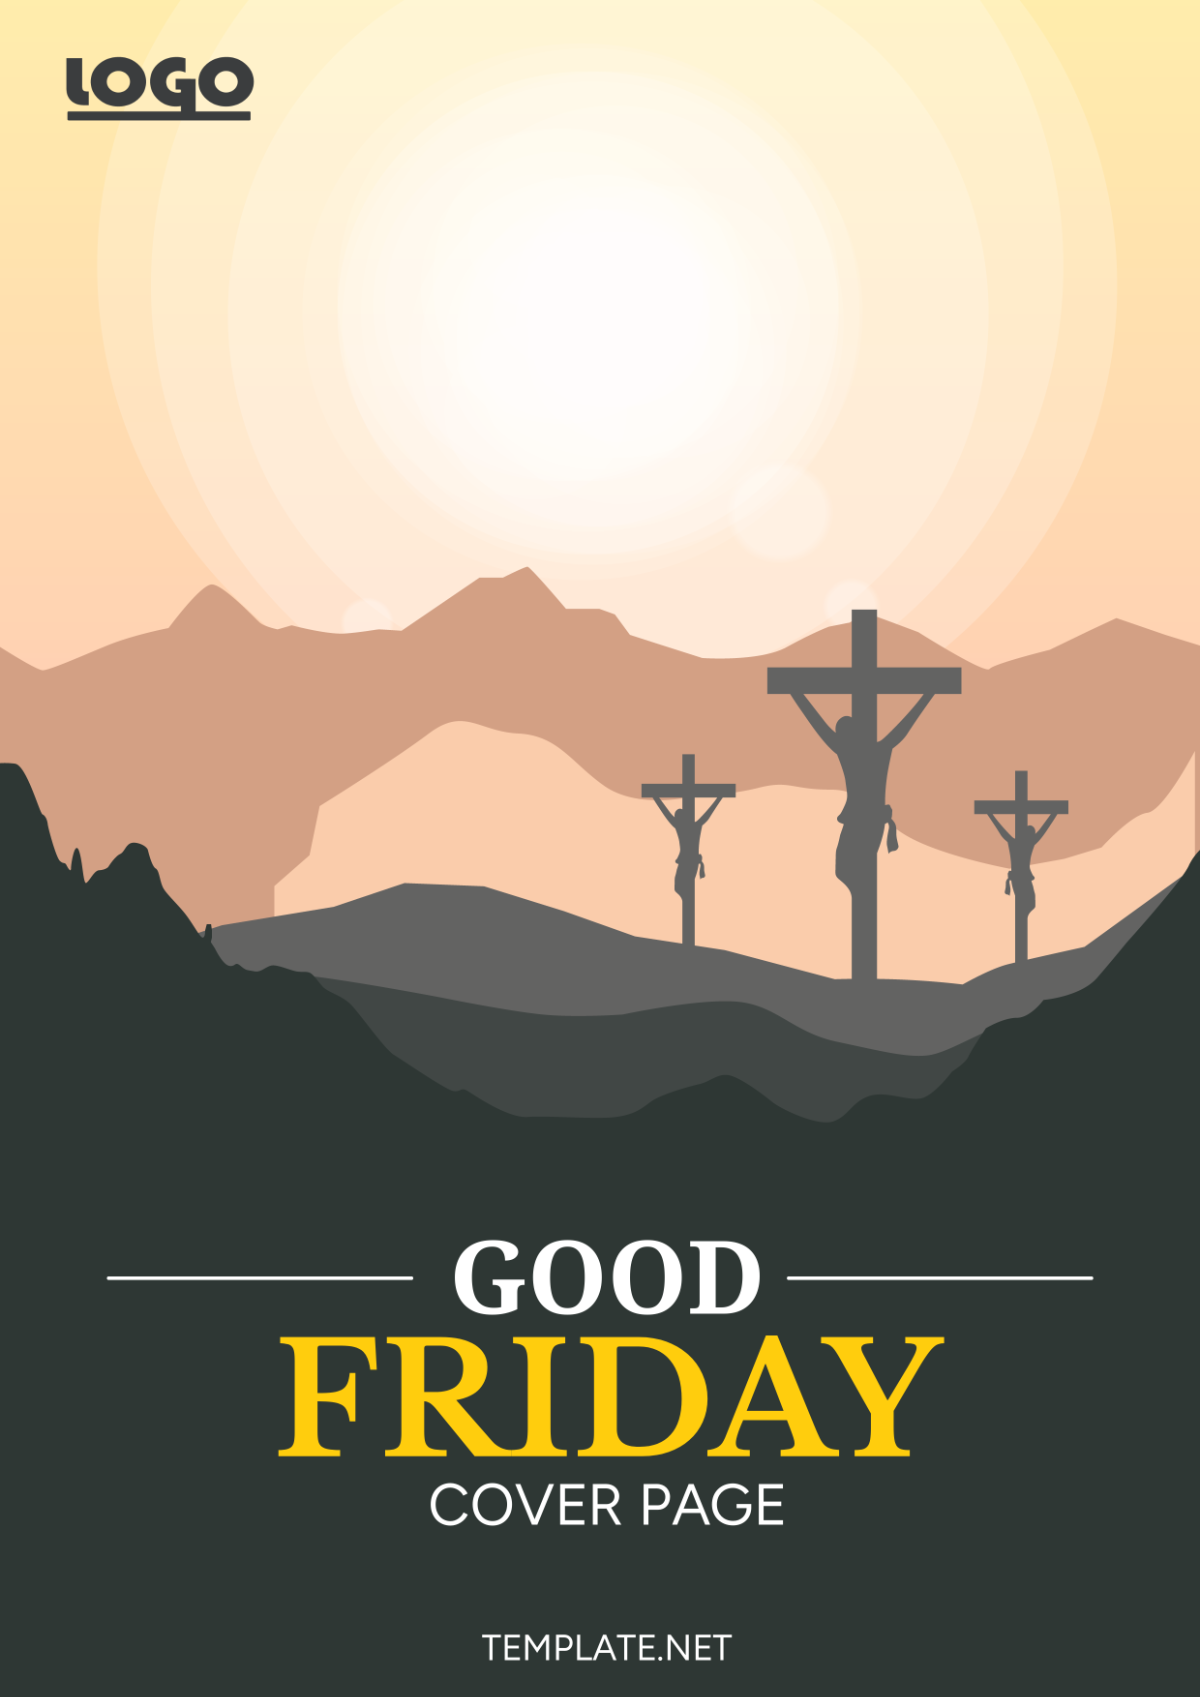 Good Friday Cover Page